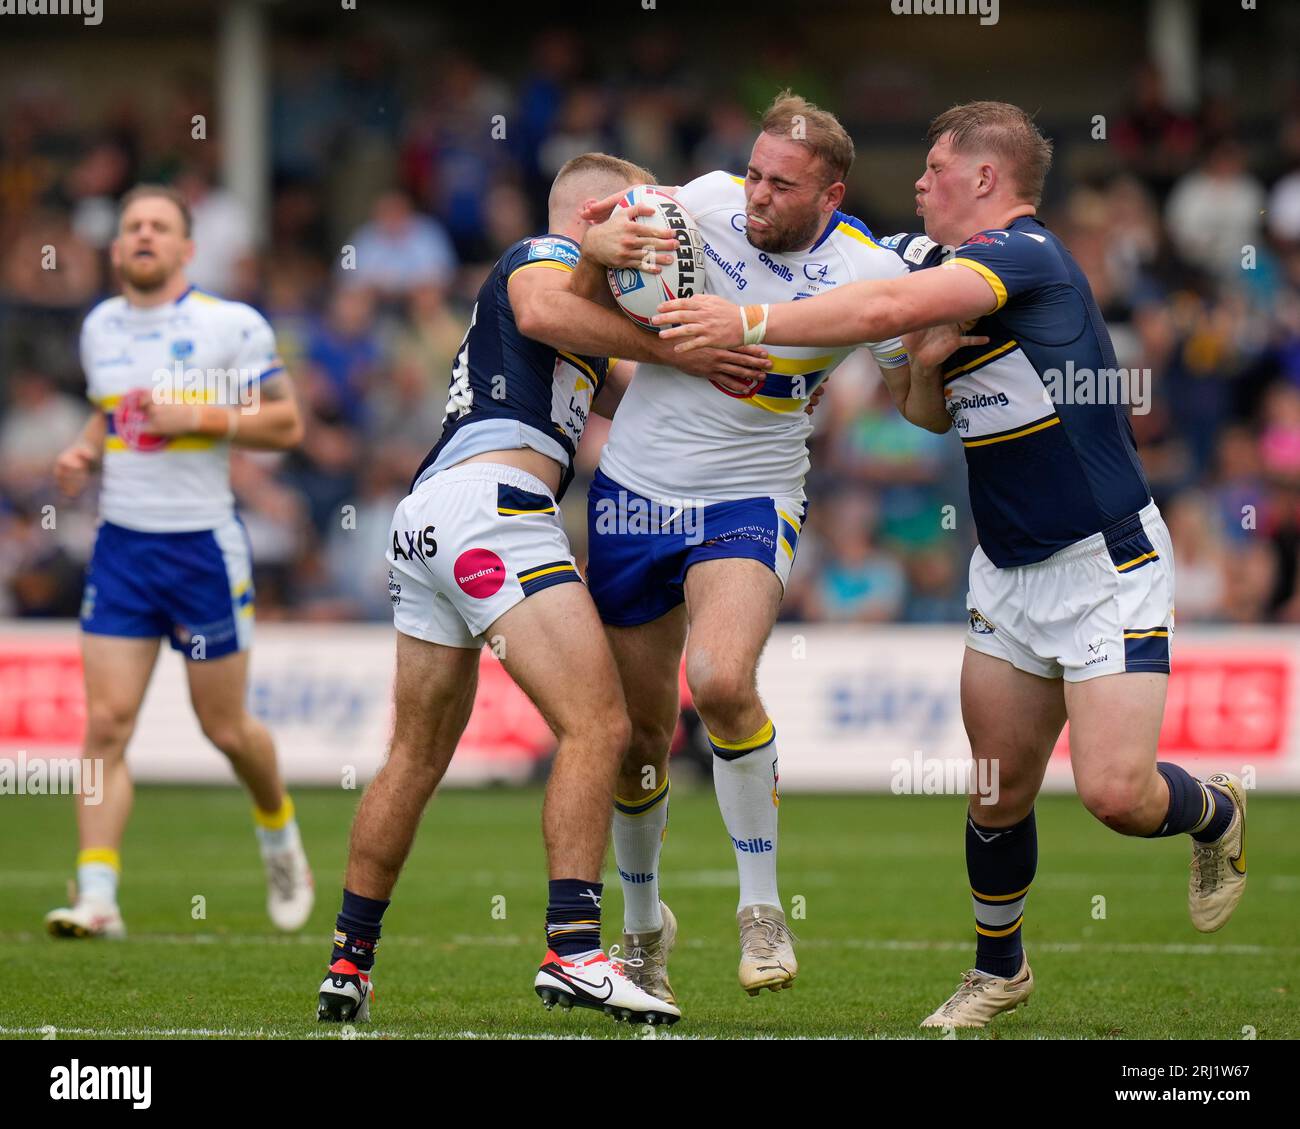 James Harrison #8 of Warrington Wolves runs at Jarrod O’Connor #14 of Leeds Rhinos and Tom Holroyd #18 of Leeds Rhinos  during the Betfred Super League Round 22 match Leeds Rhinos vs Warrington Wolves at Headingley Stadium, Leeds, United Kingdom, 20th August 2023  (Photo by Steve Flynn/News Images) Stock Photo